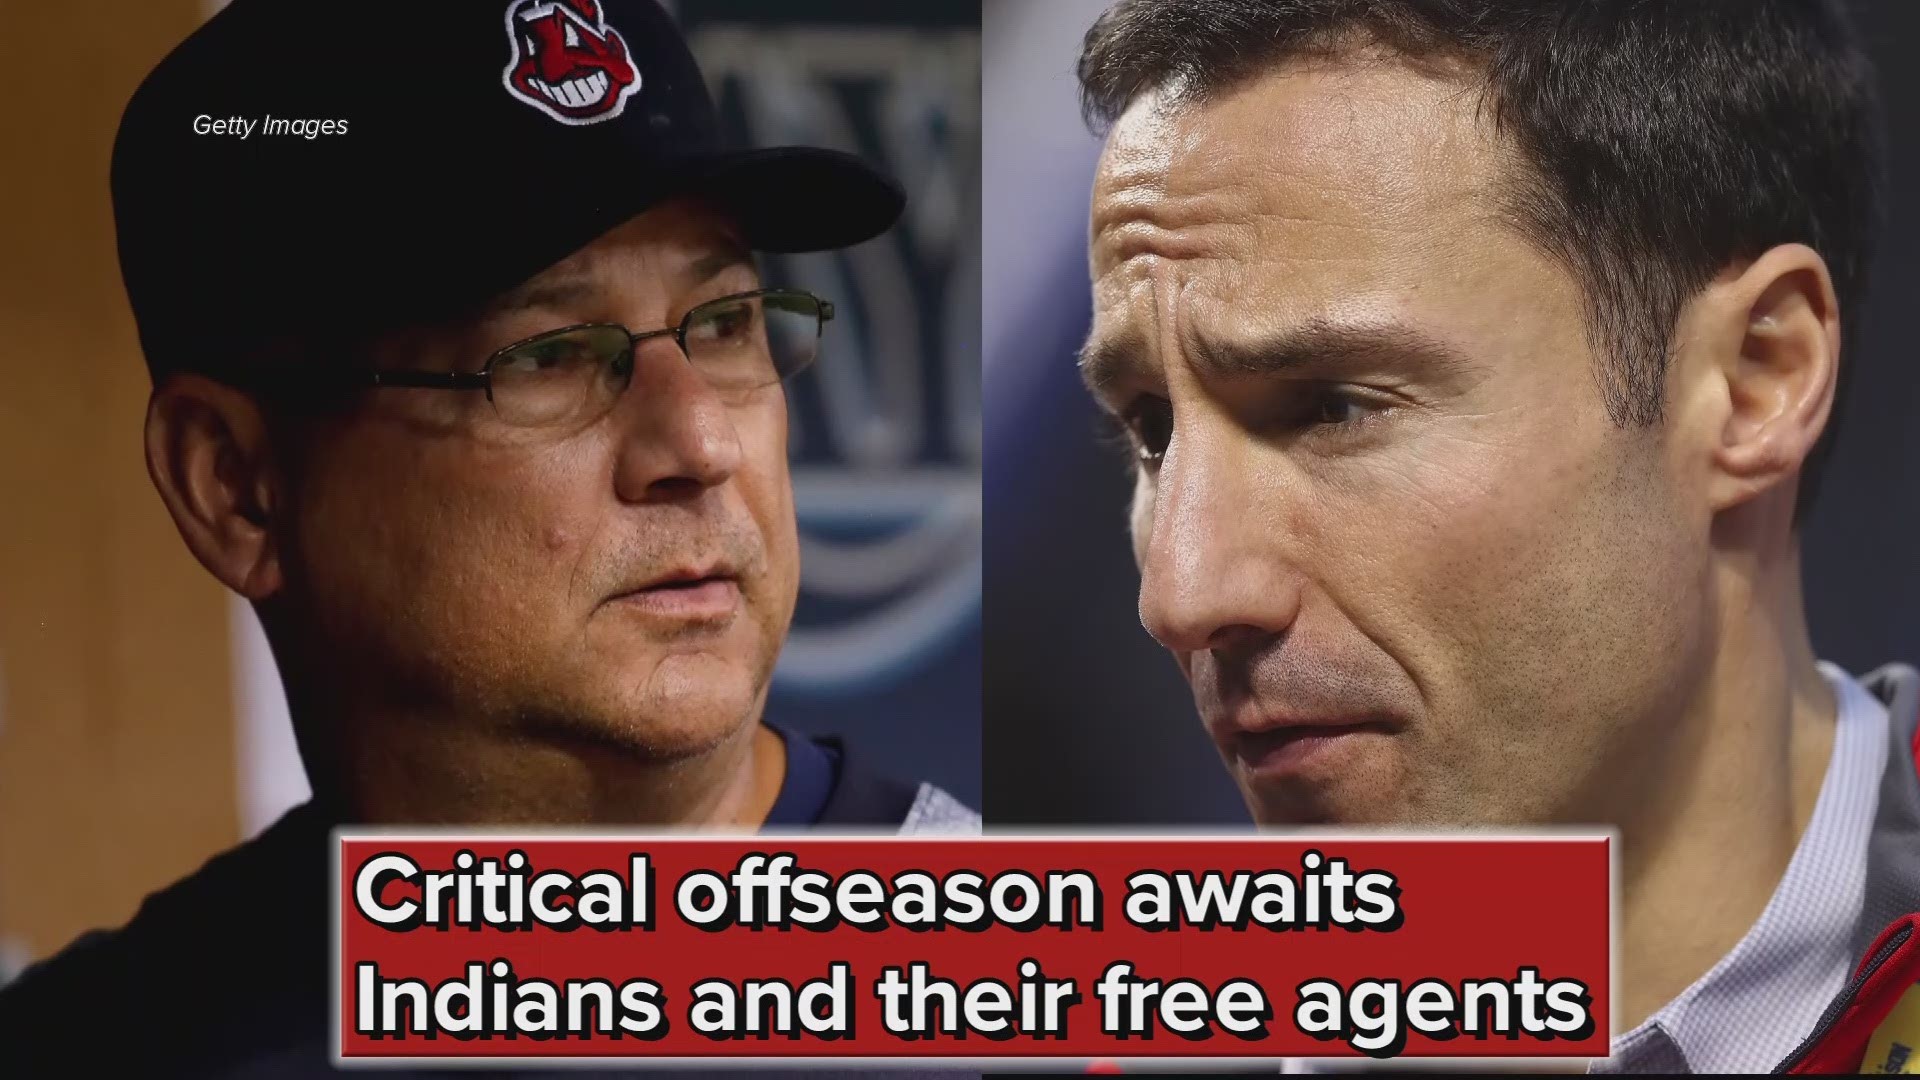 With free agency looming, Cleveland Indians hold emotional exit interviews